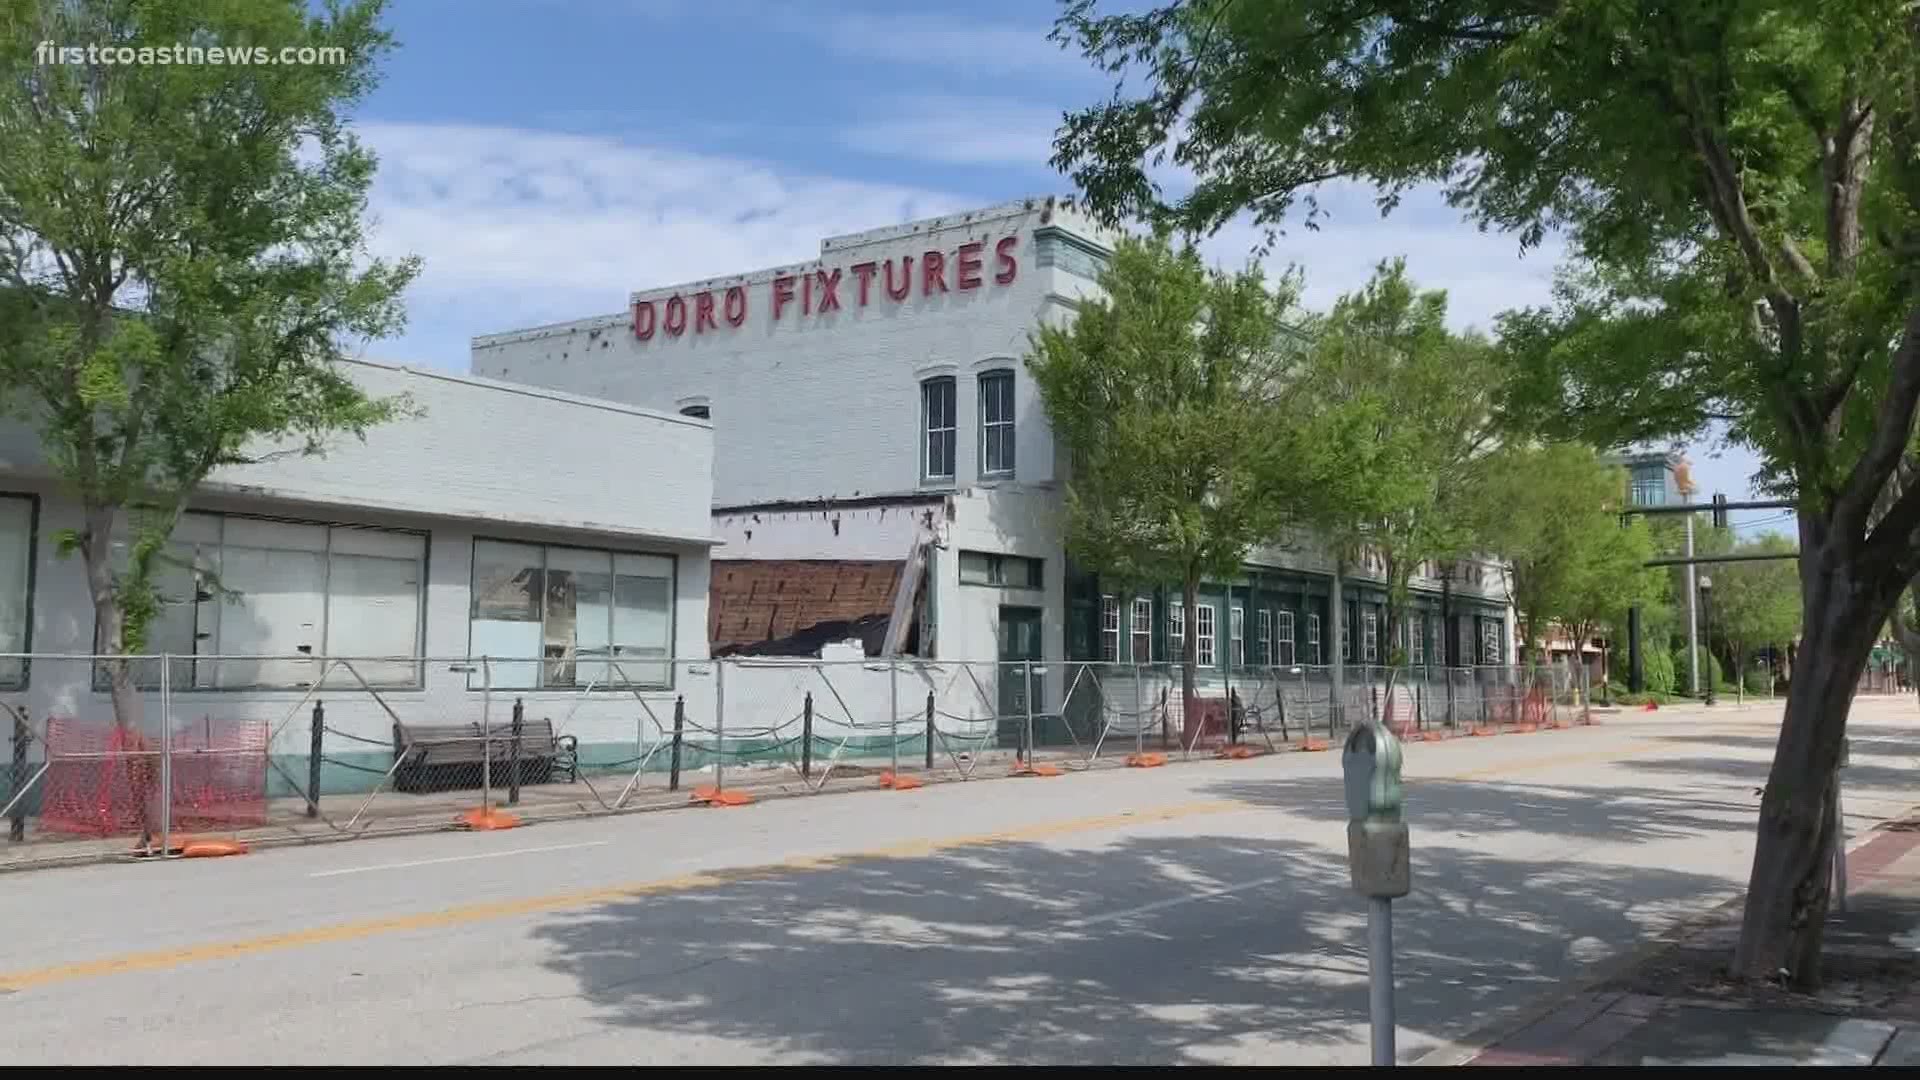 Old Doro Fixture building in downtown Jacksonville comes down, making way for the new apartments